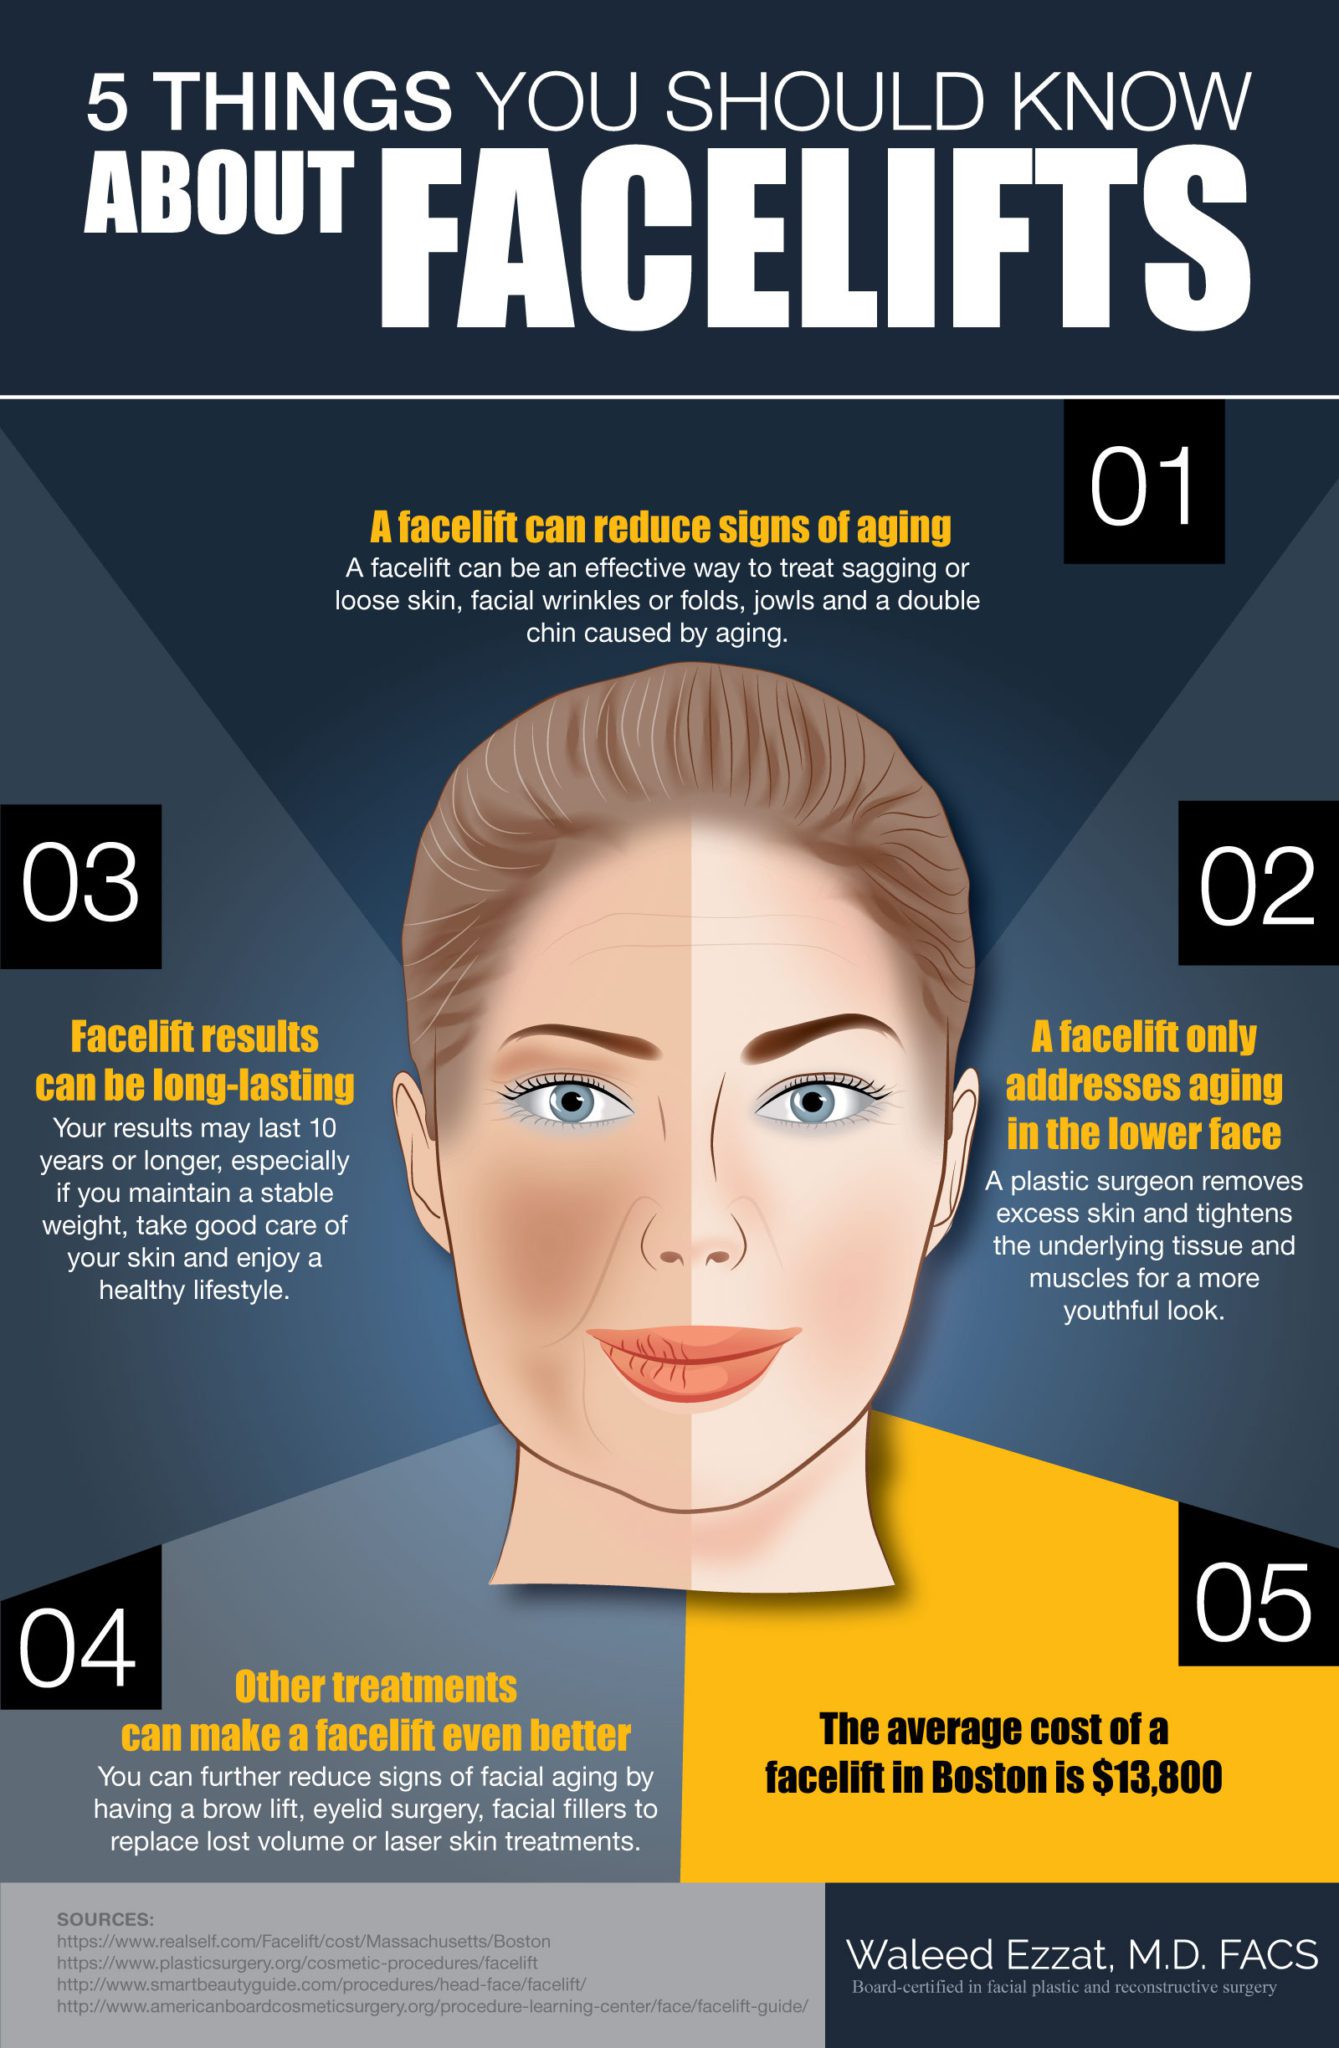 5 Things You Should Know about Facelifts